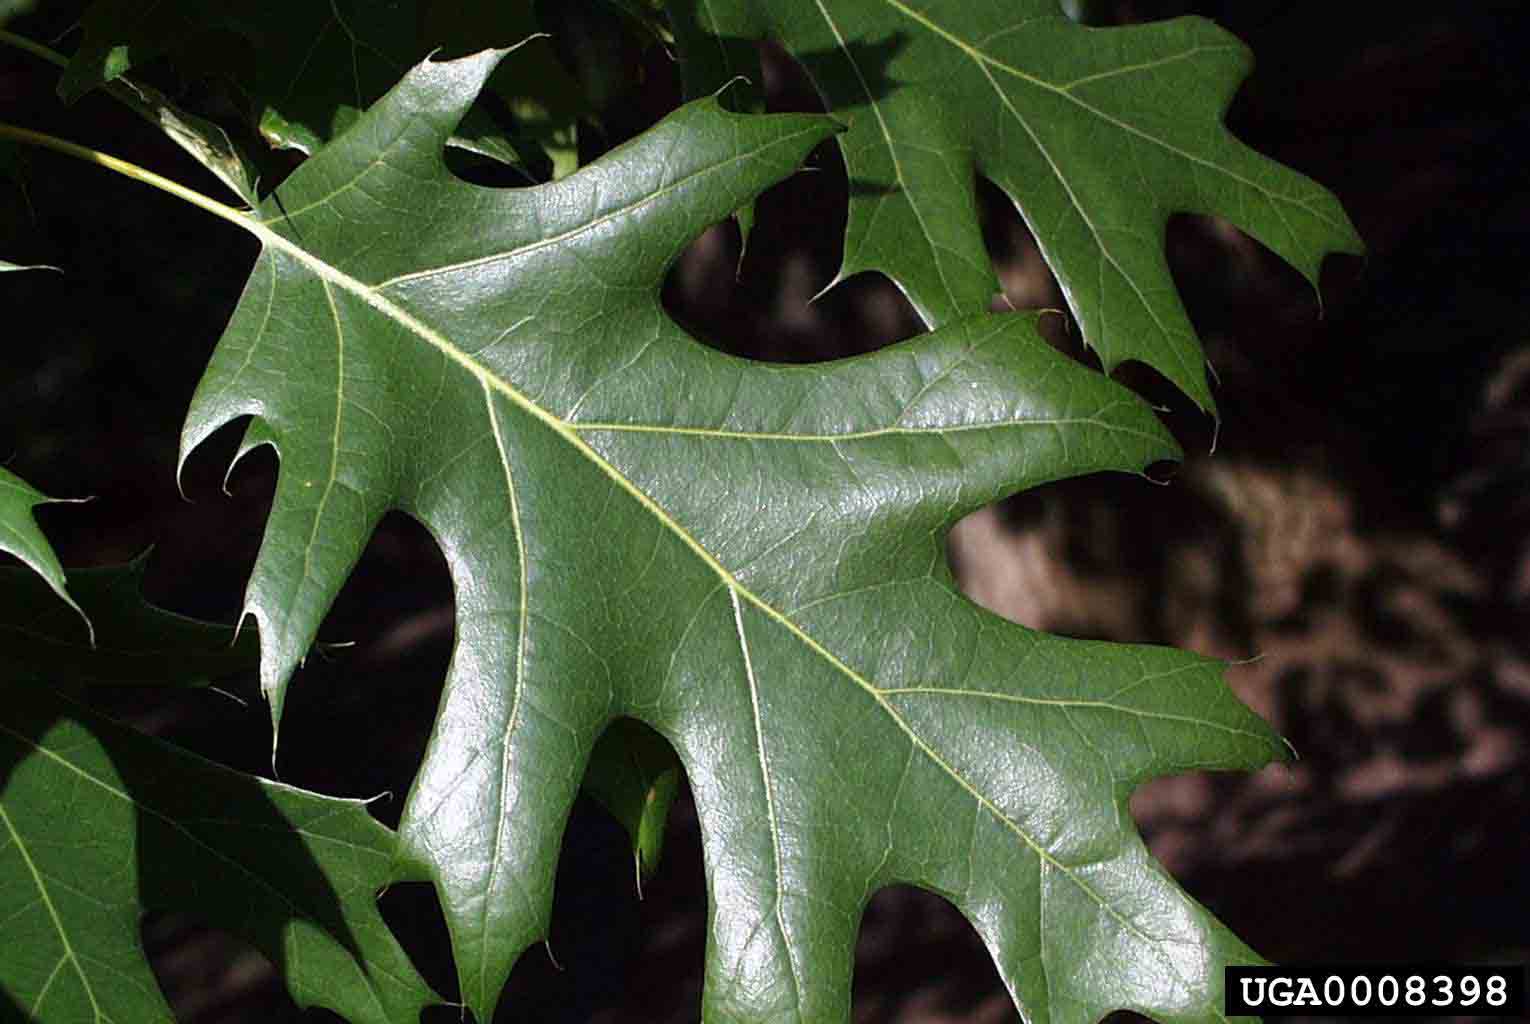 Northern red oak leaf, showing tapered lobes and bristles on the tips